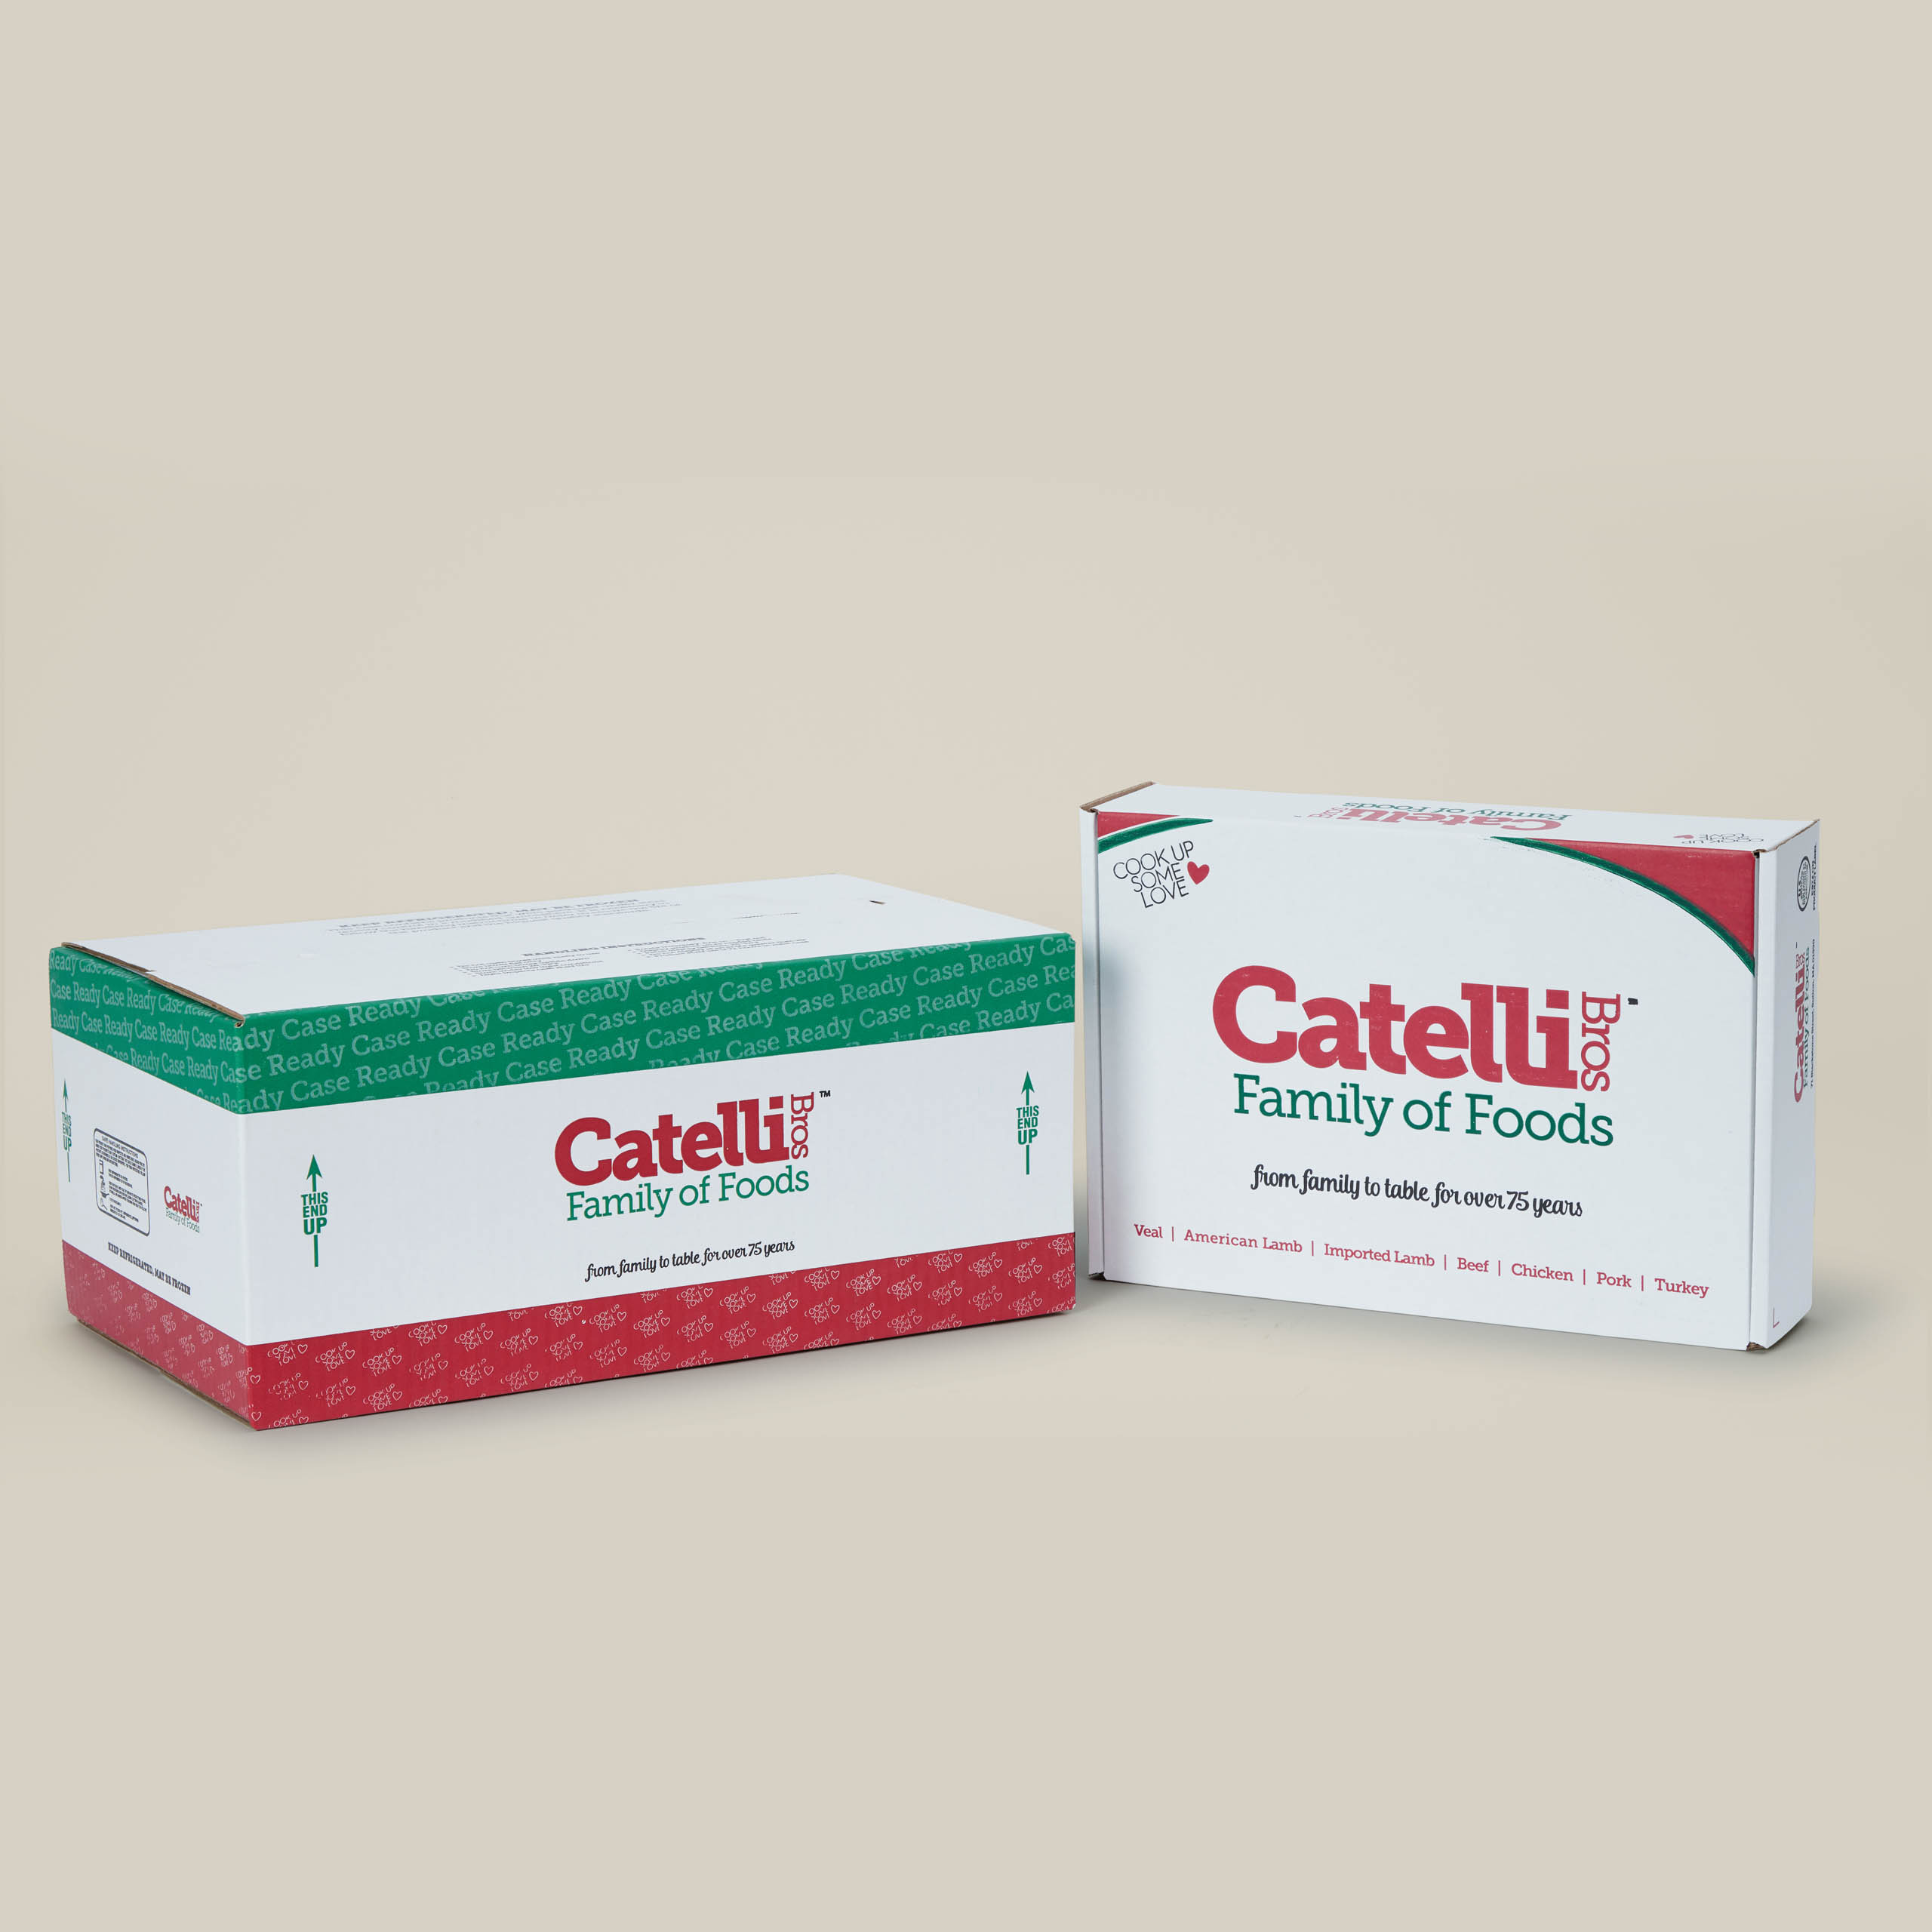 A box of catelli food on a white background.